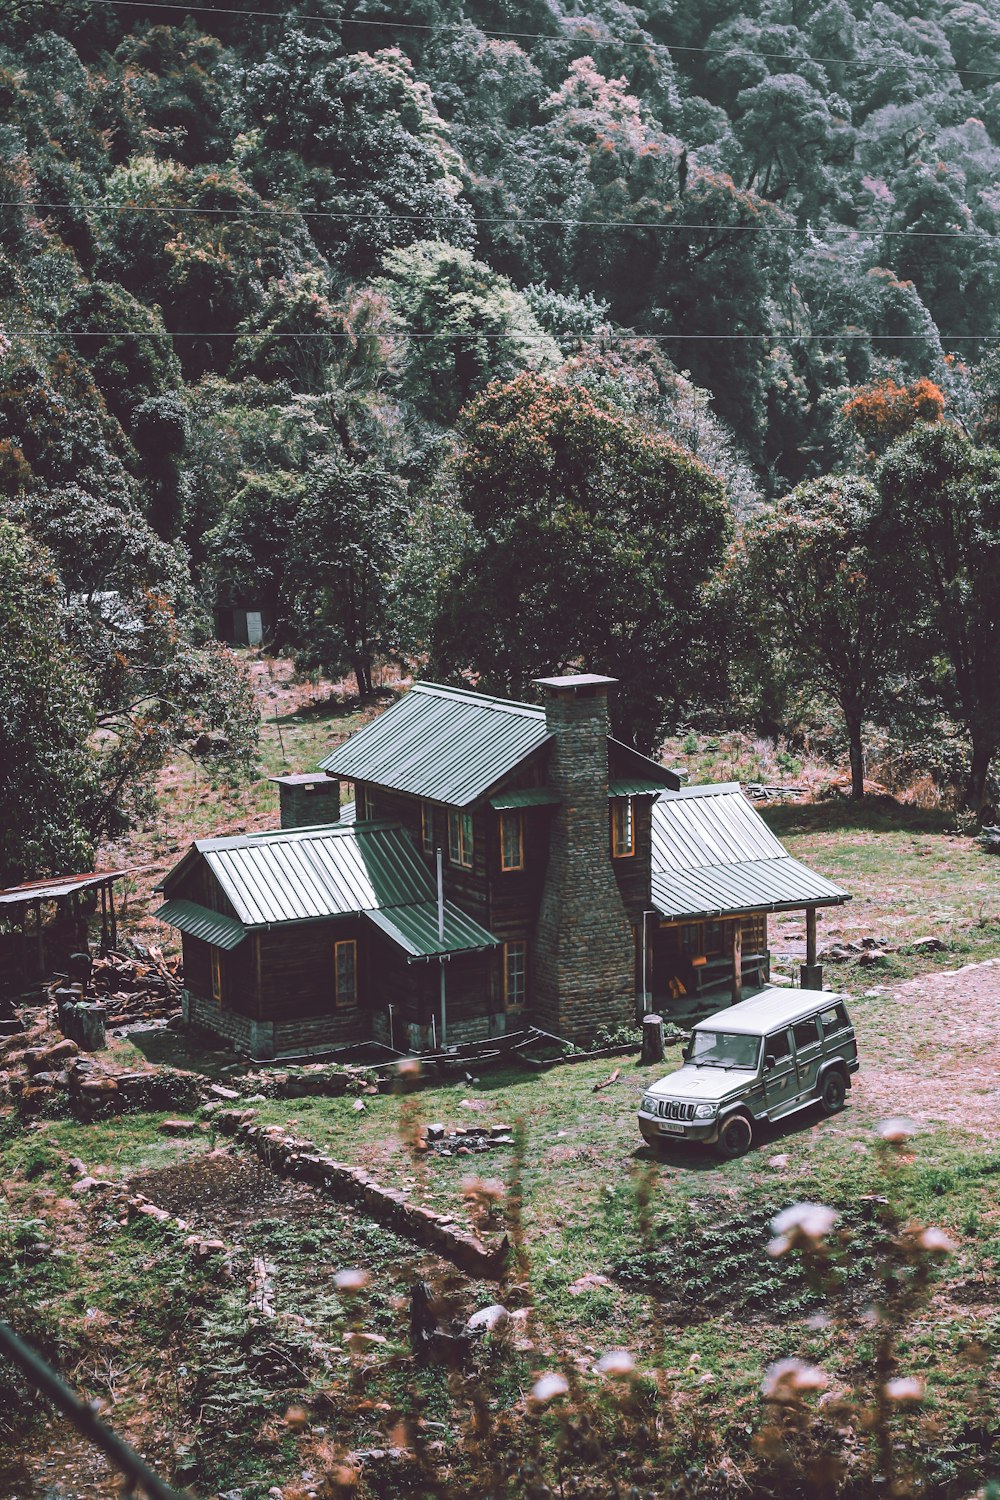 black car parked beside green and brown wooden house during daytime